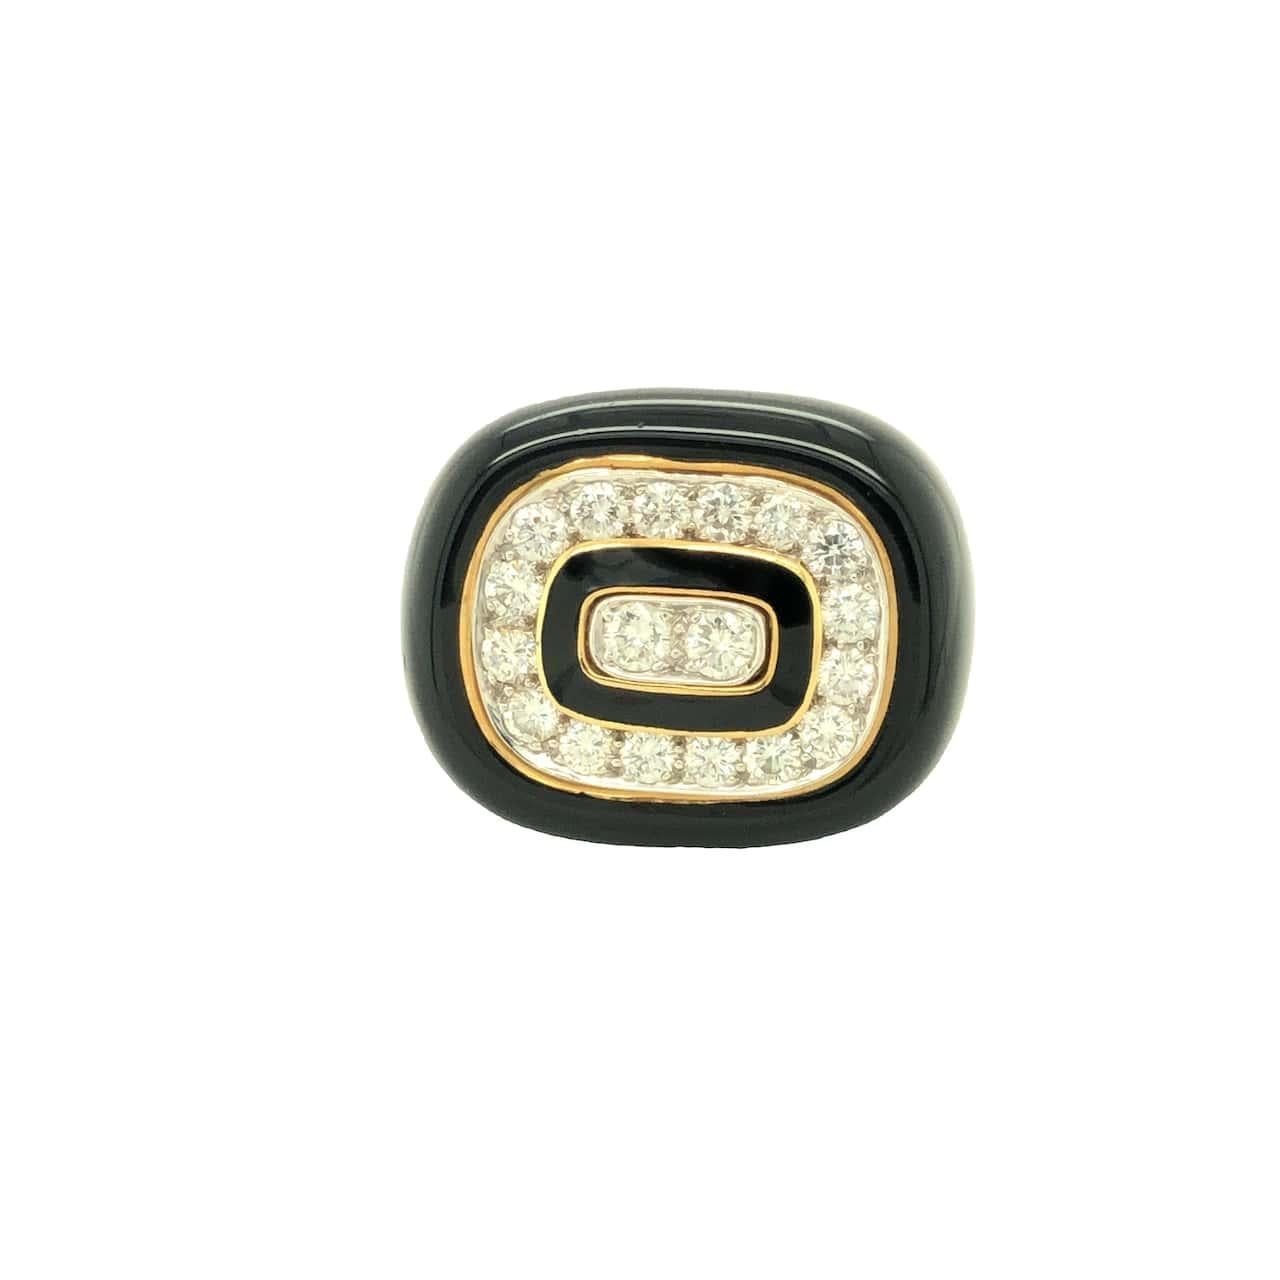 An extraordinary discovery from our estate collection, this remarkable black enamel and diamond ring has been meticulously crafted in 18K yellow gold by Tiffany & Co. The ring's top section spans a generous 7/8 inch by 1 inch and is sized between